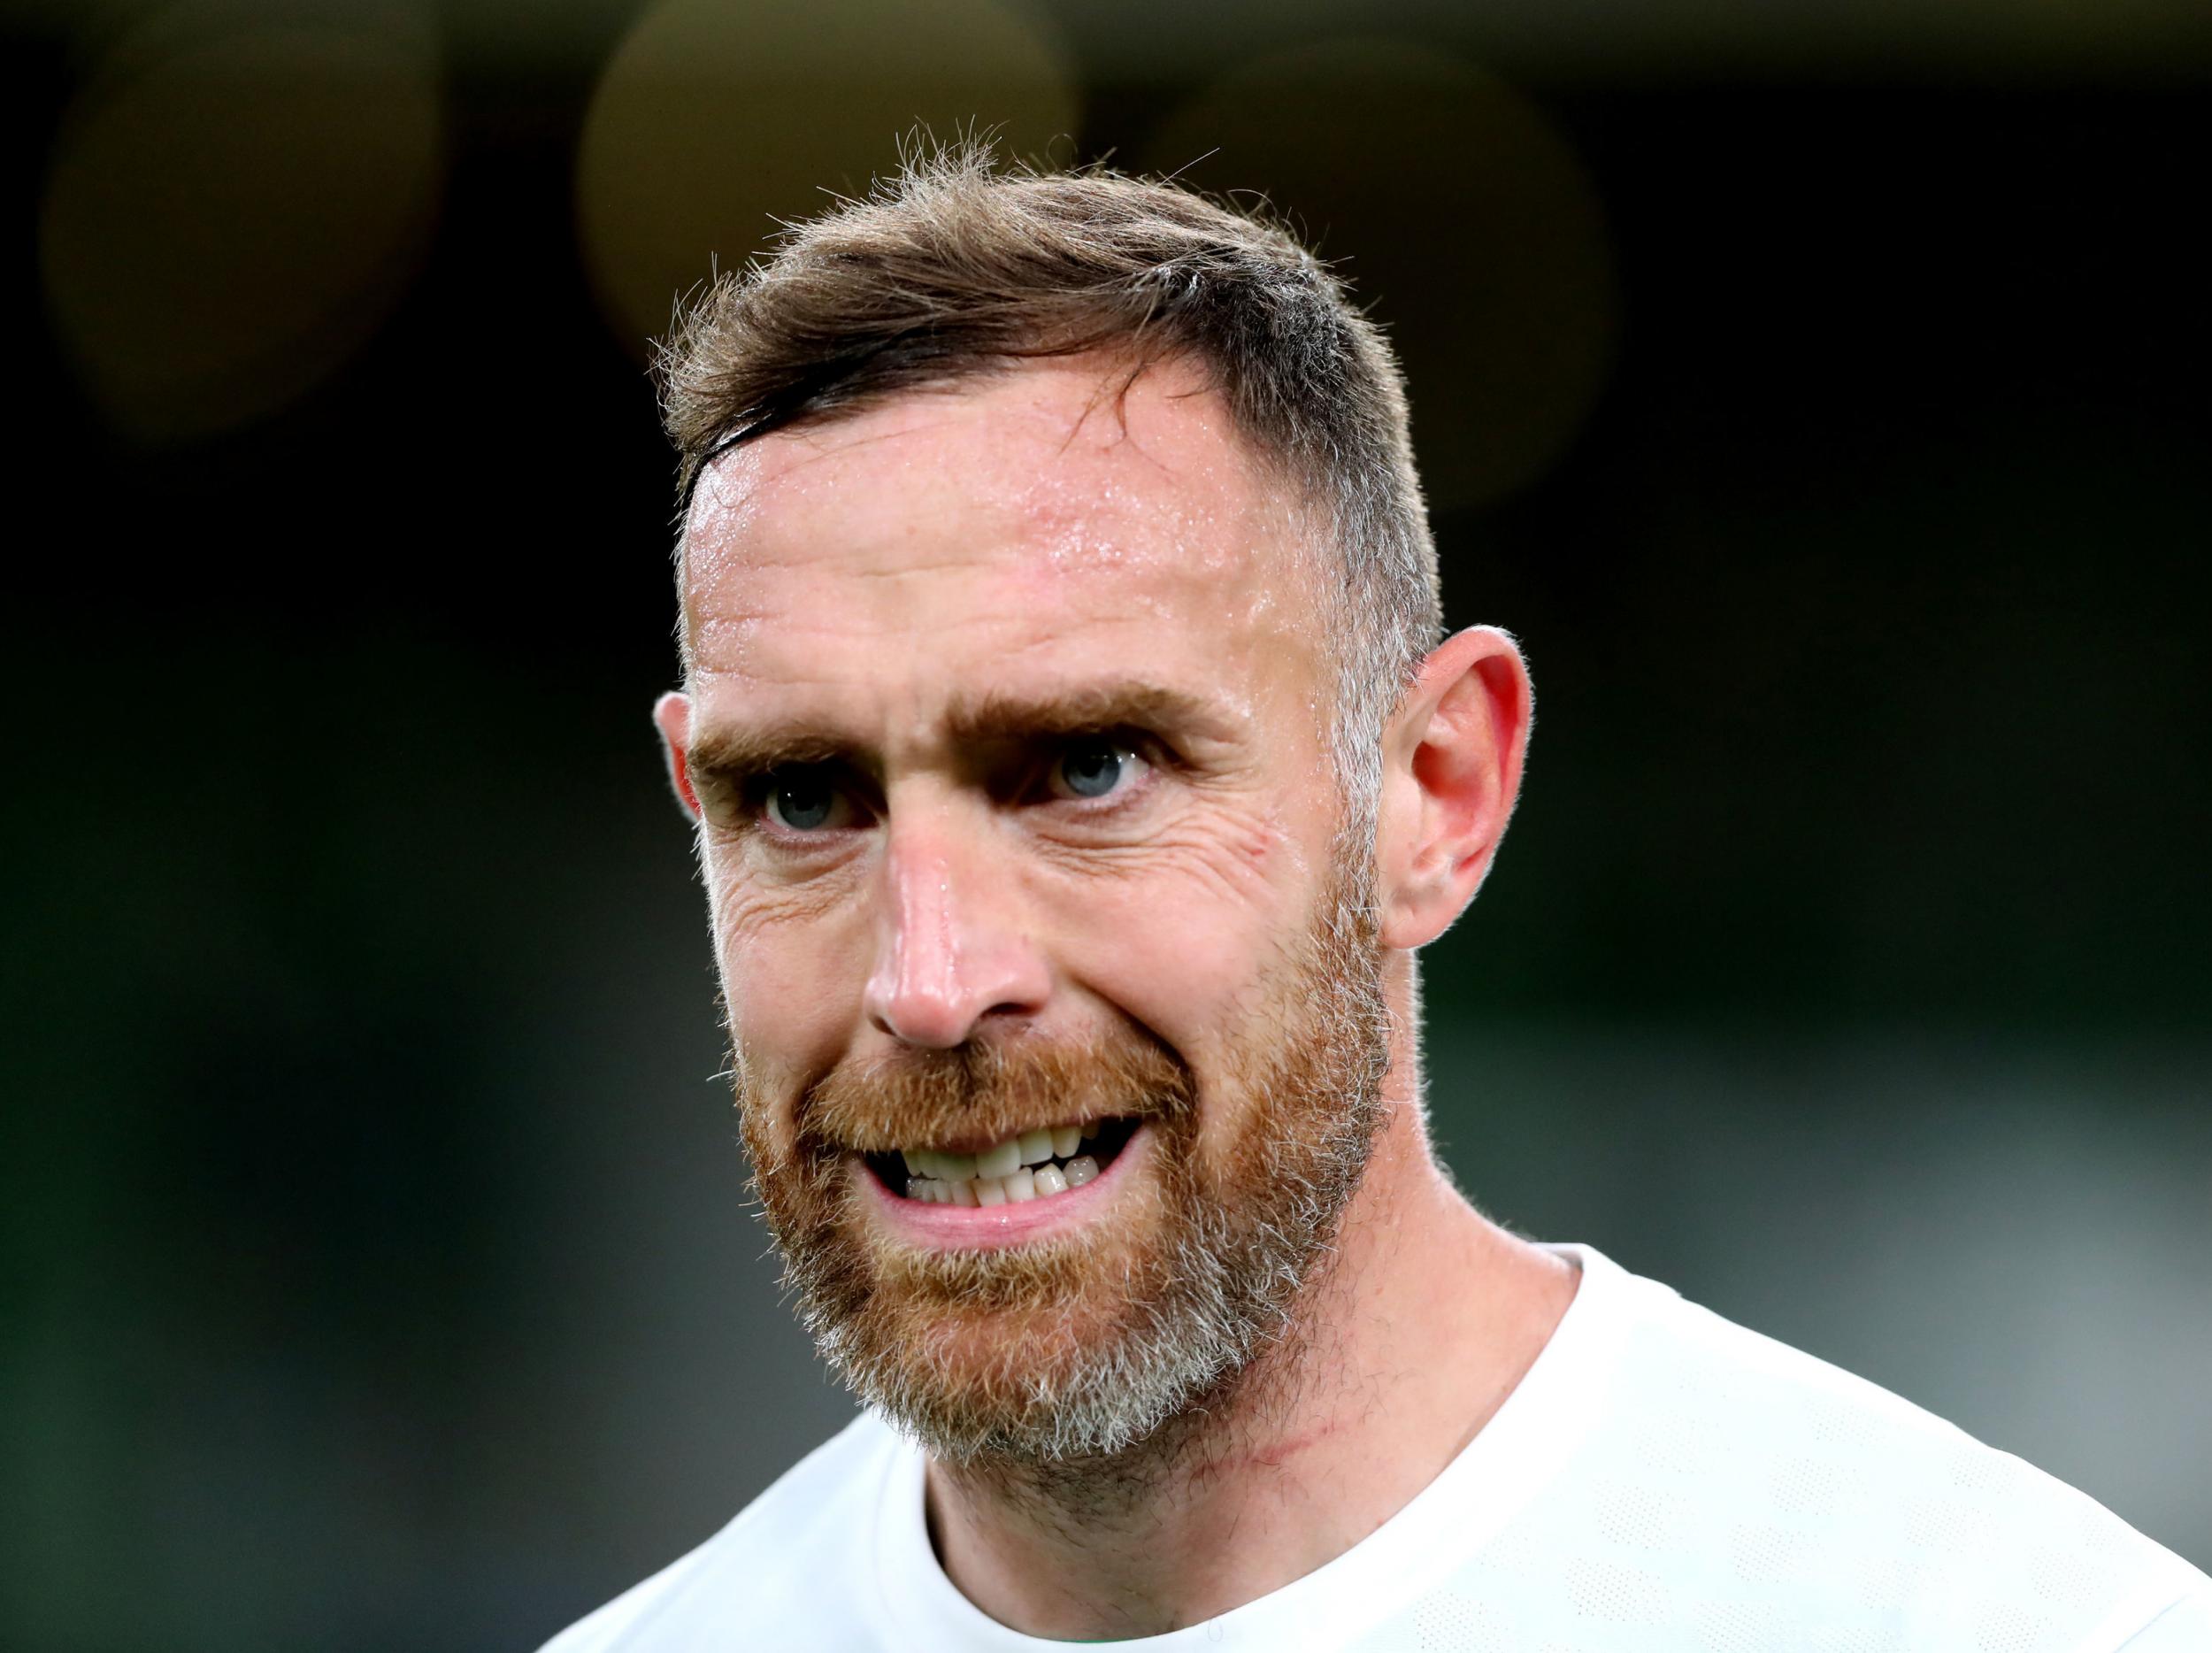 Richard Keogh's contract was terminated by Derby